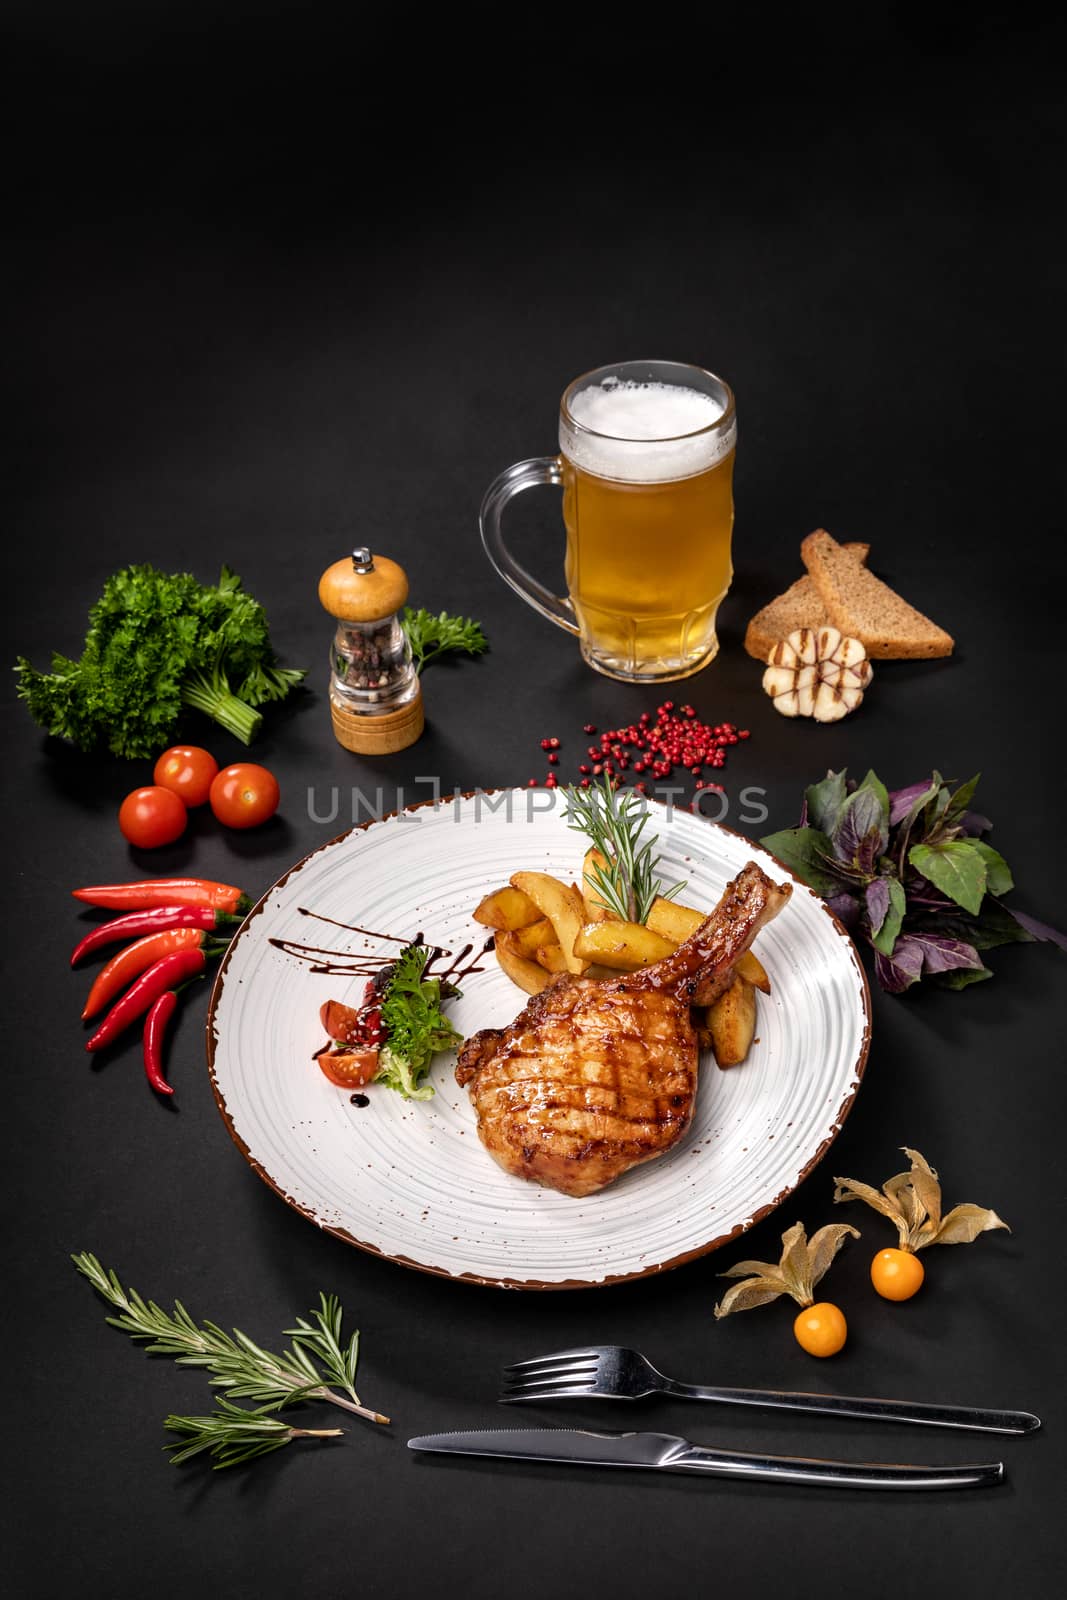 An antrecot of pork on a plate next to a bottle of beer on a black background